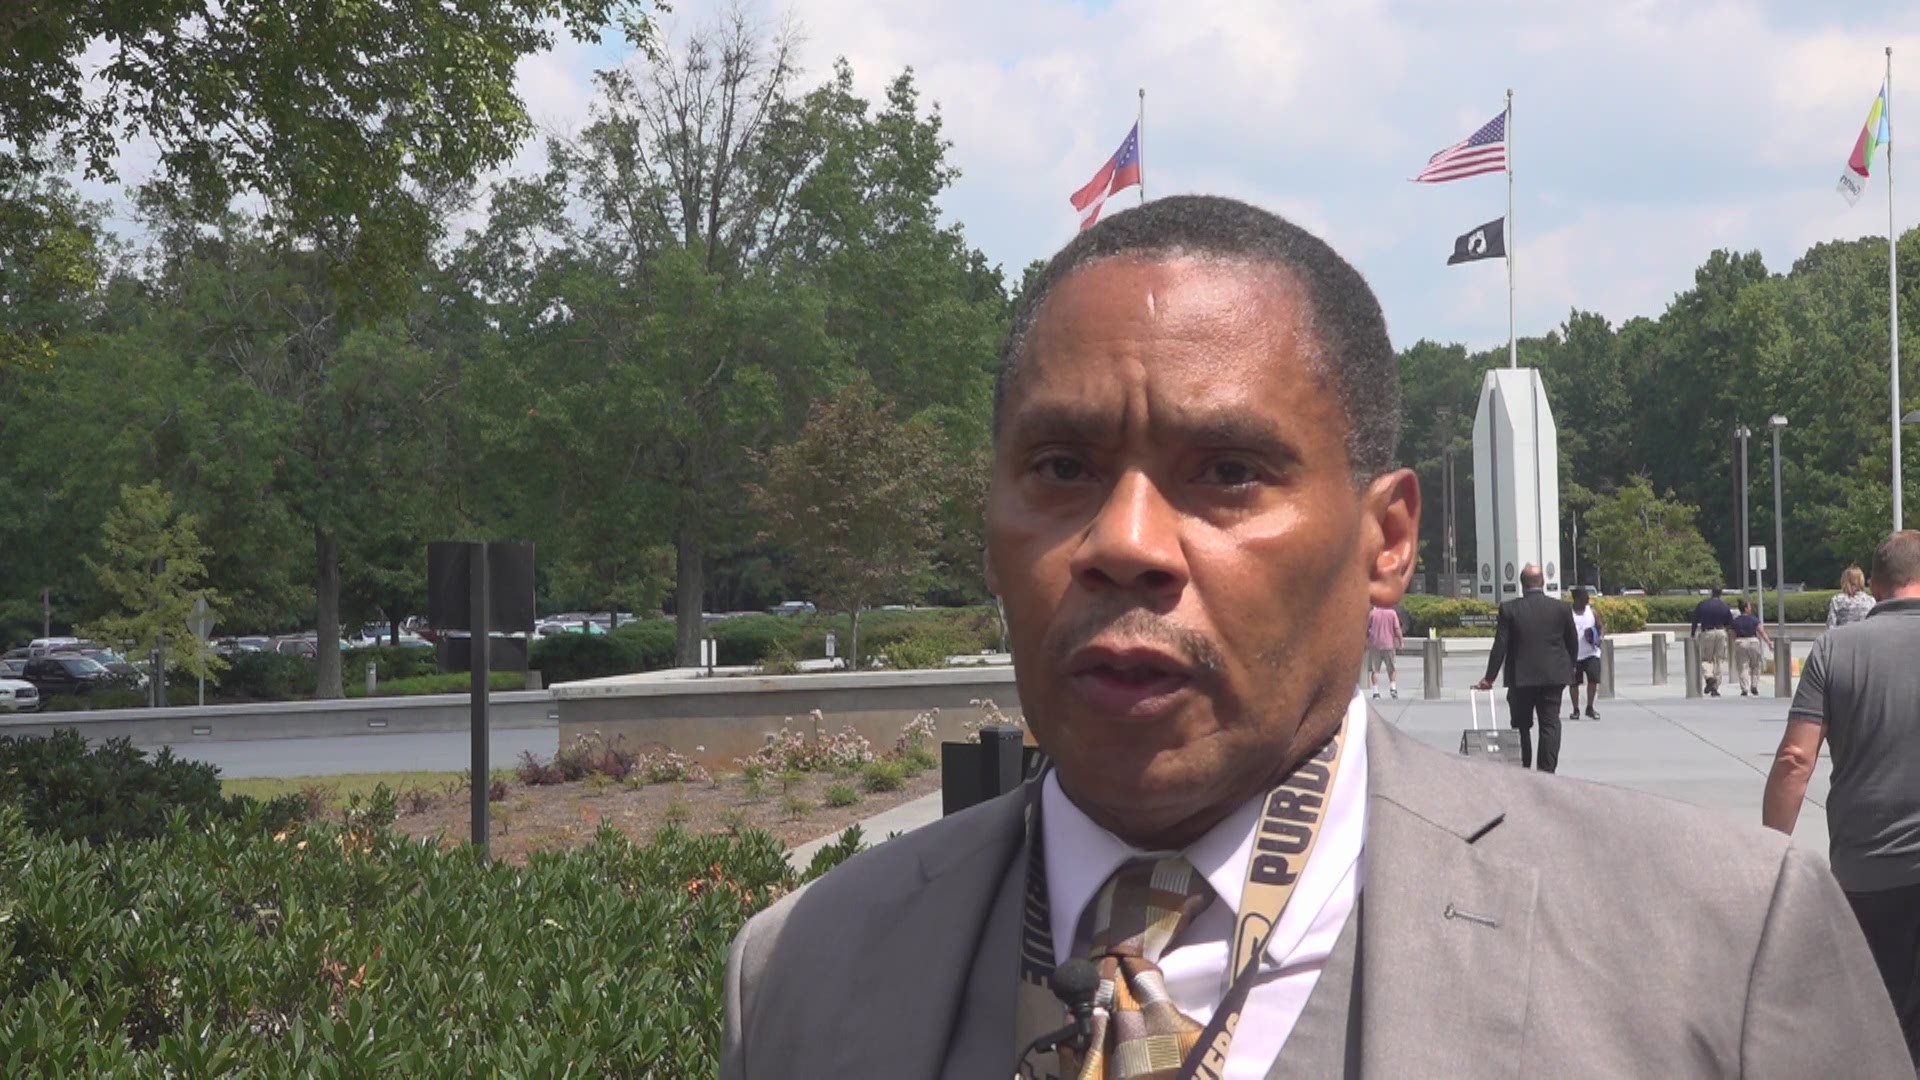 Officials in Gwinnett County describe what enforcement will look like in the county after the county's solicitor general decided not to prosecute cases of misdemeanor marijuana possession.